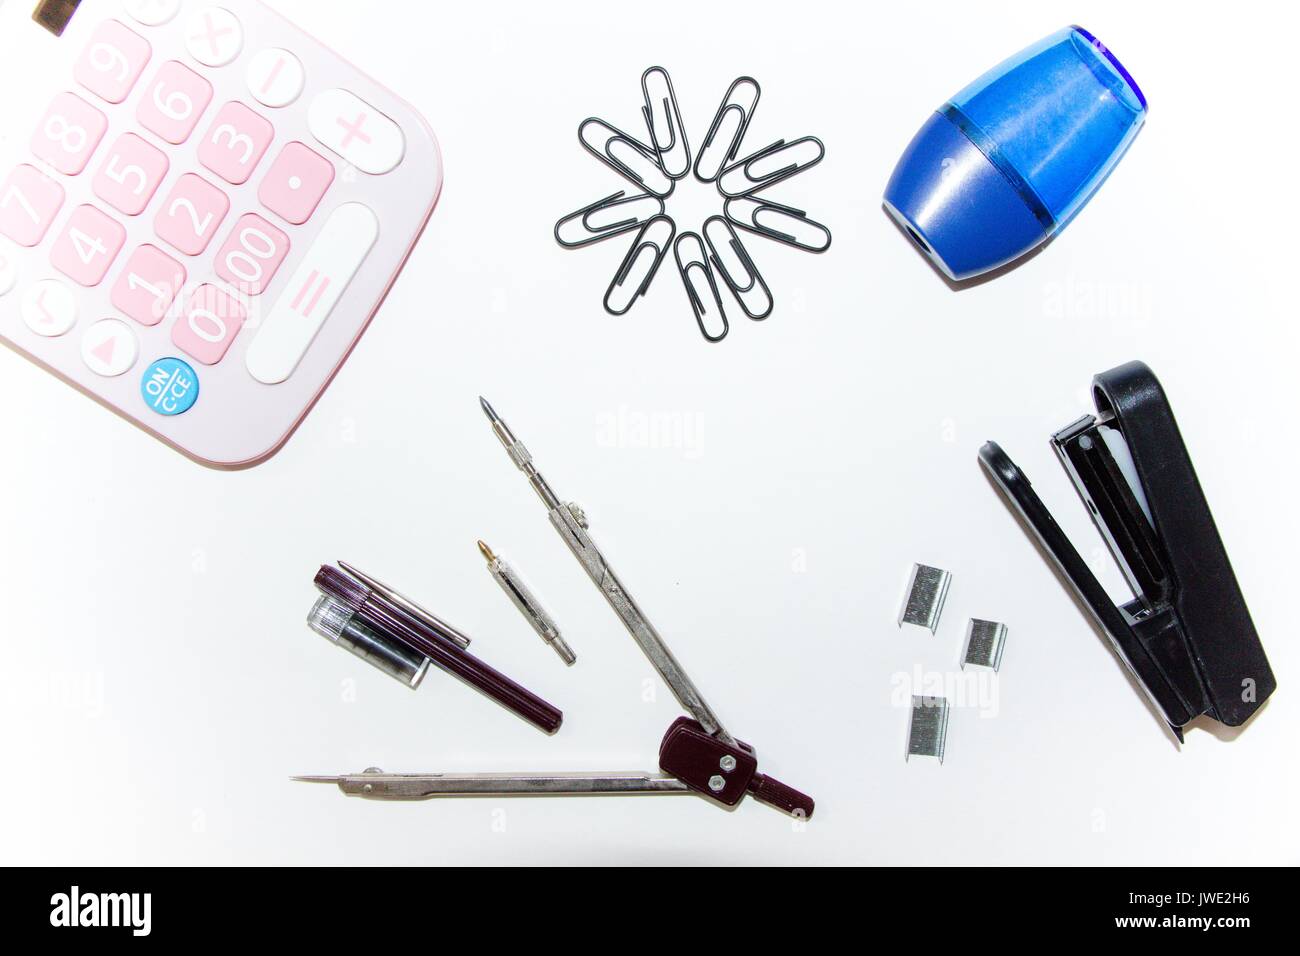 Accessories for the learning process-calculators, clips, compasses and accessories for the compass, stapler, staples, pencil sharpener. Stock Photo